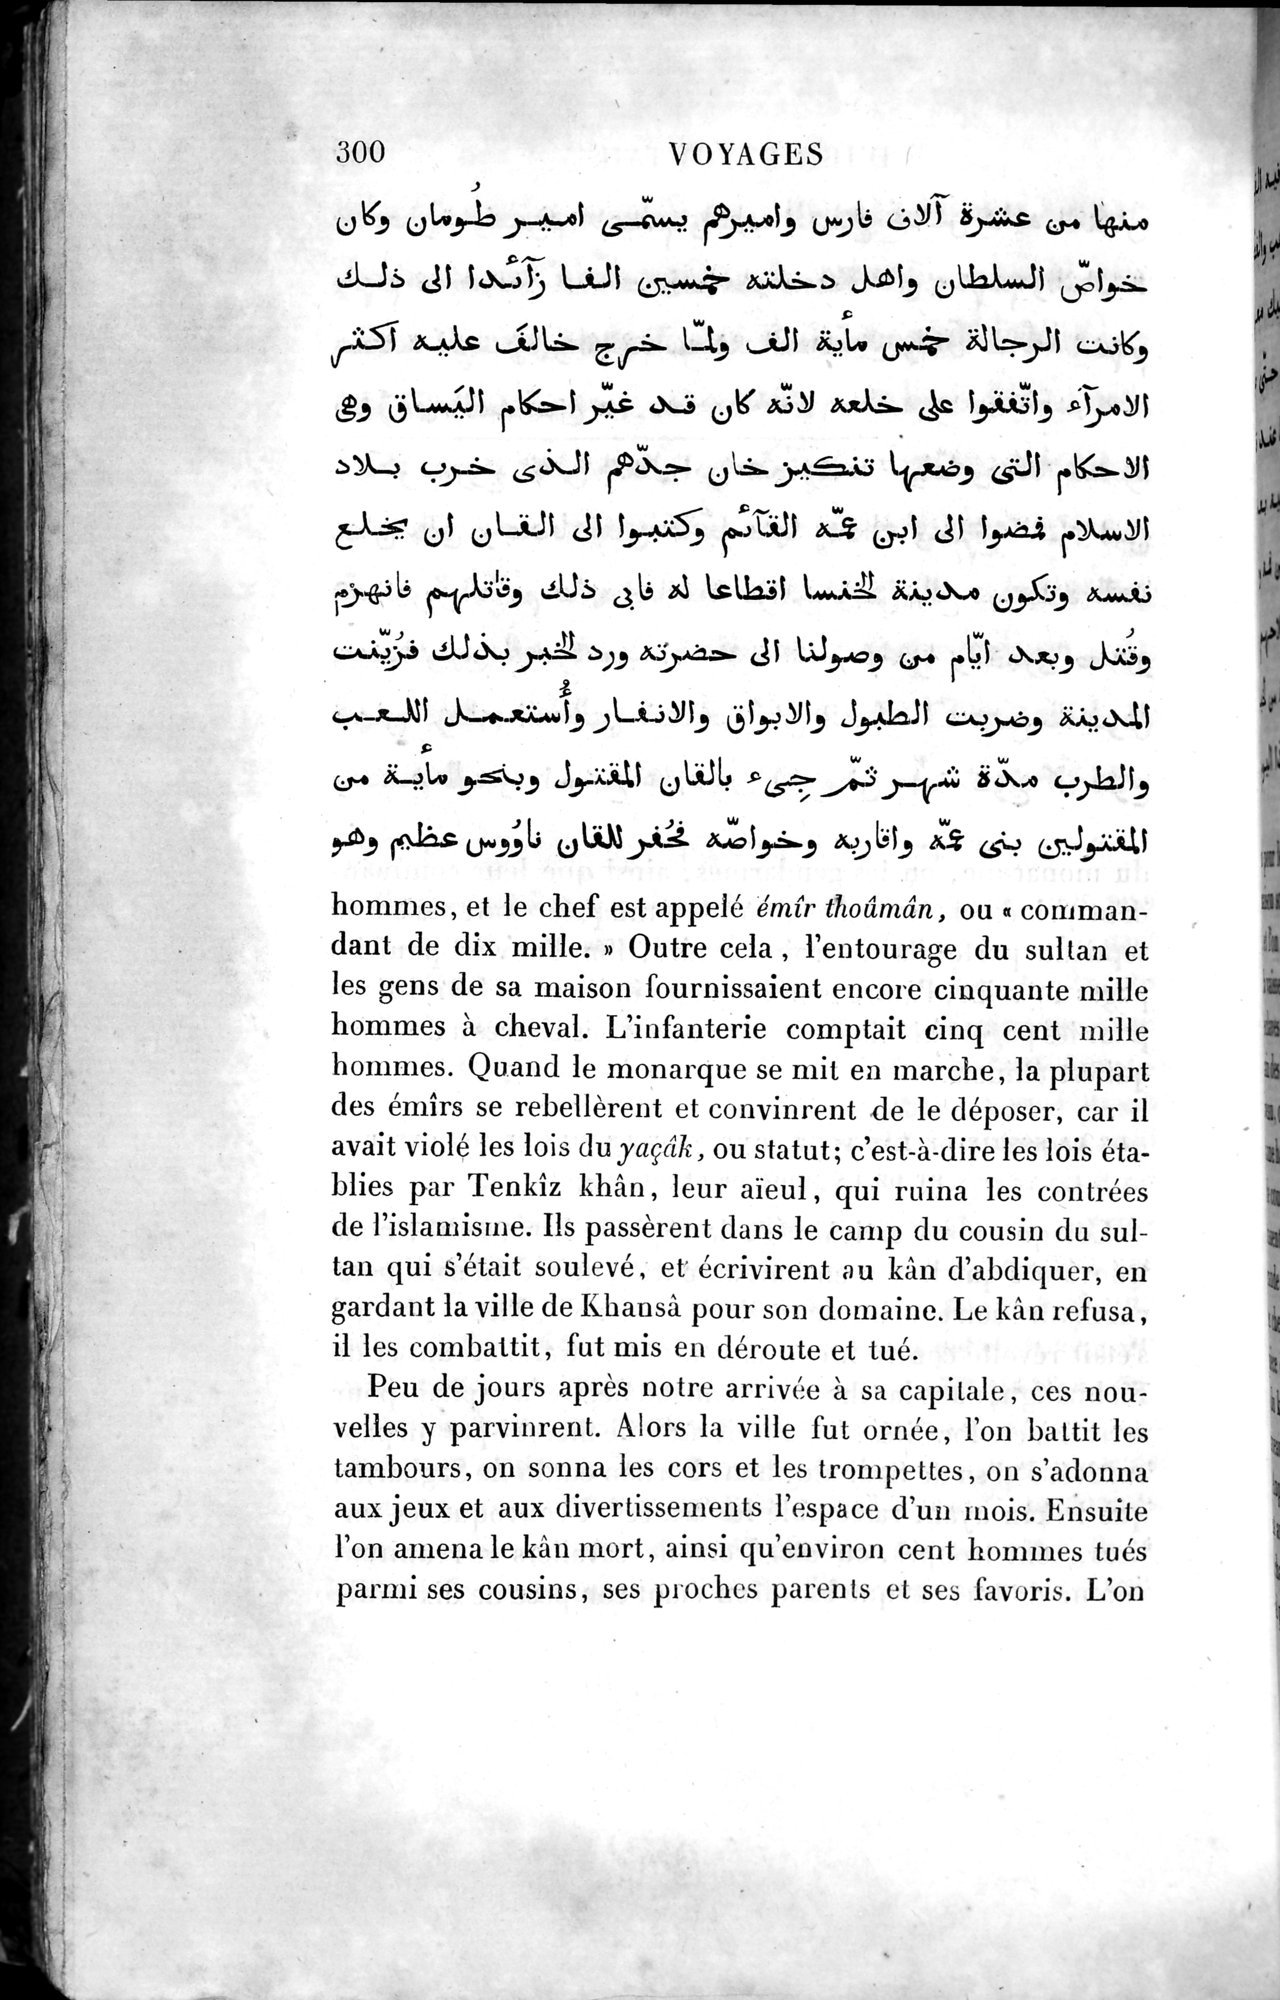 Voyages d'Ibn Batoutah : vol.4 / Page 312 (Grayscale High Resolution Image)